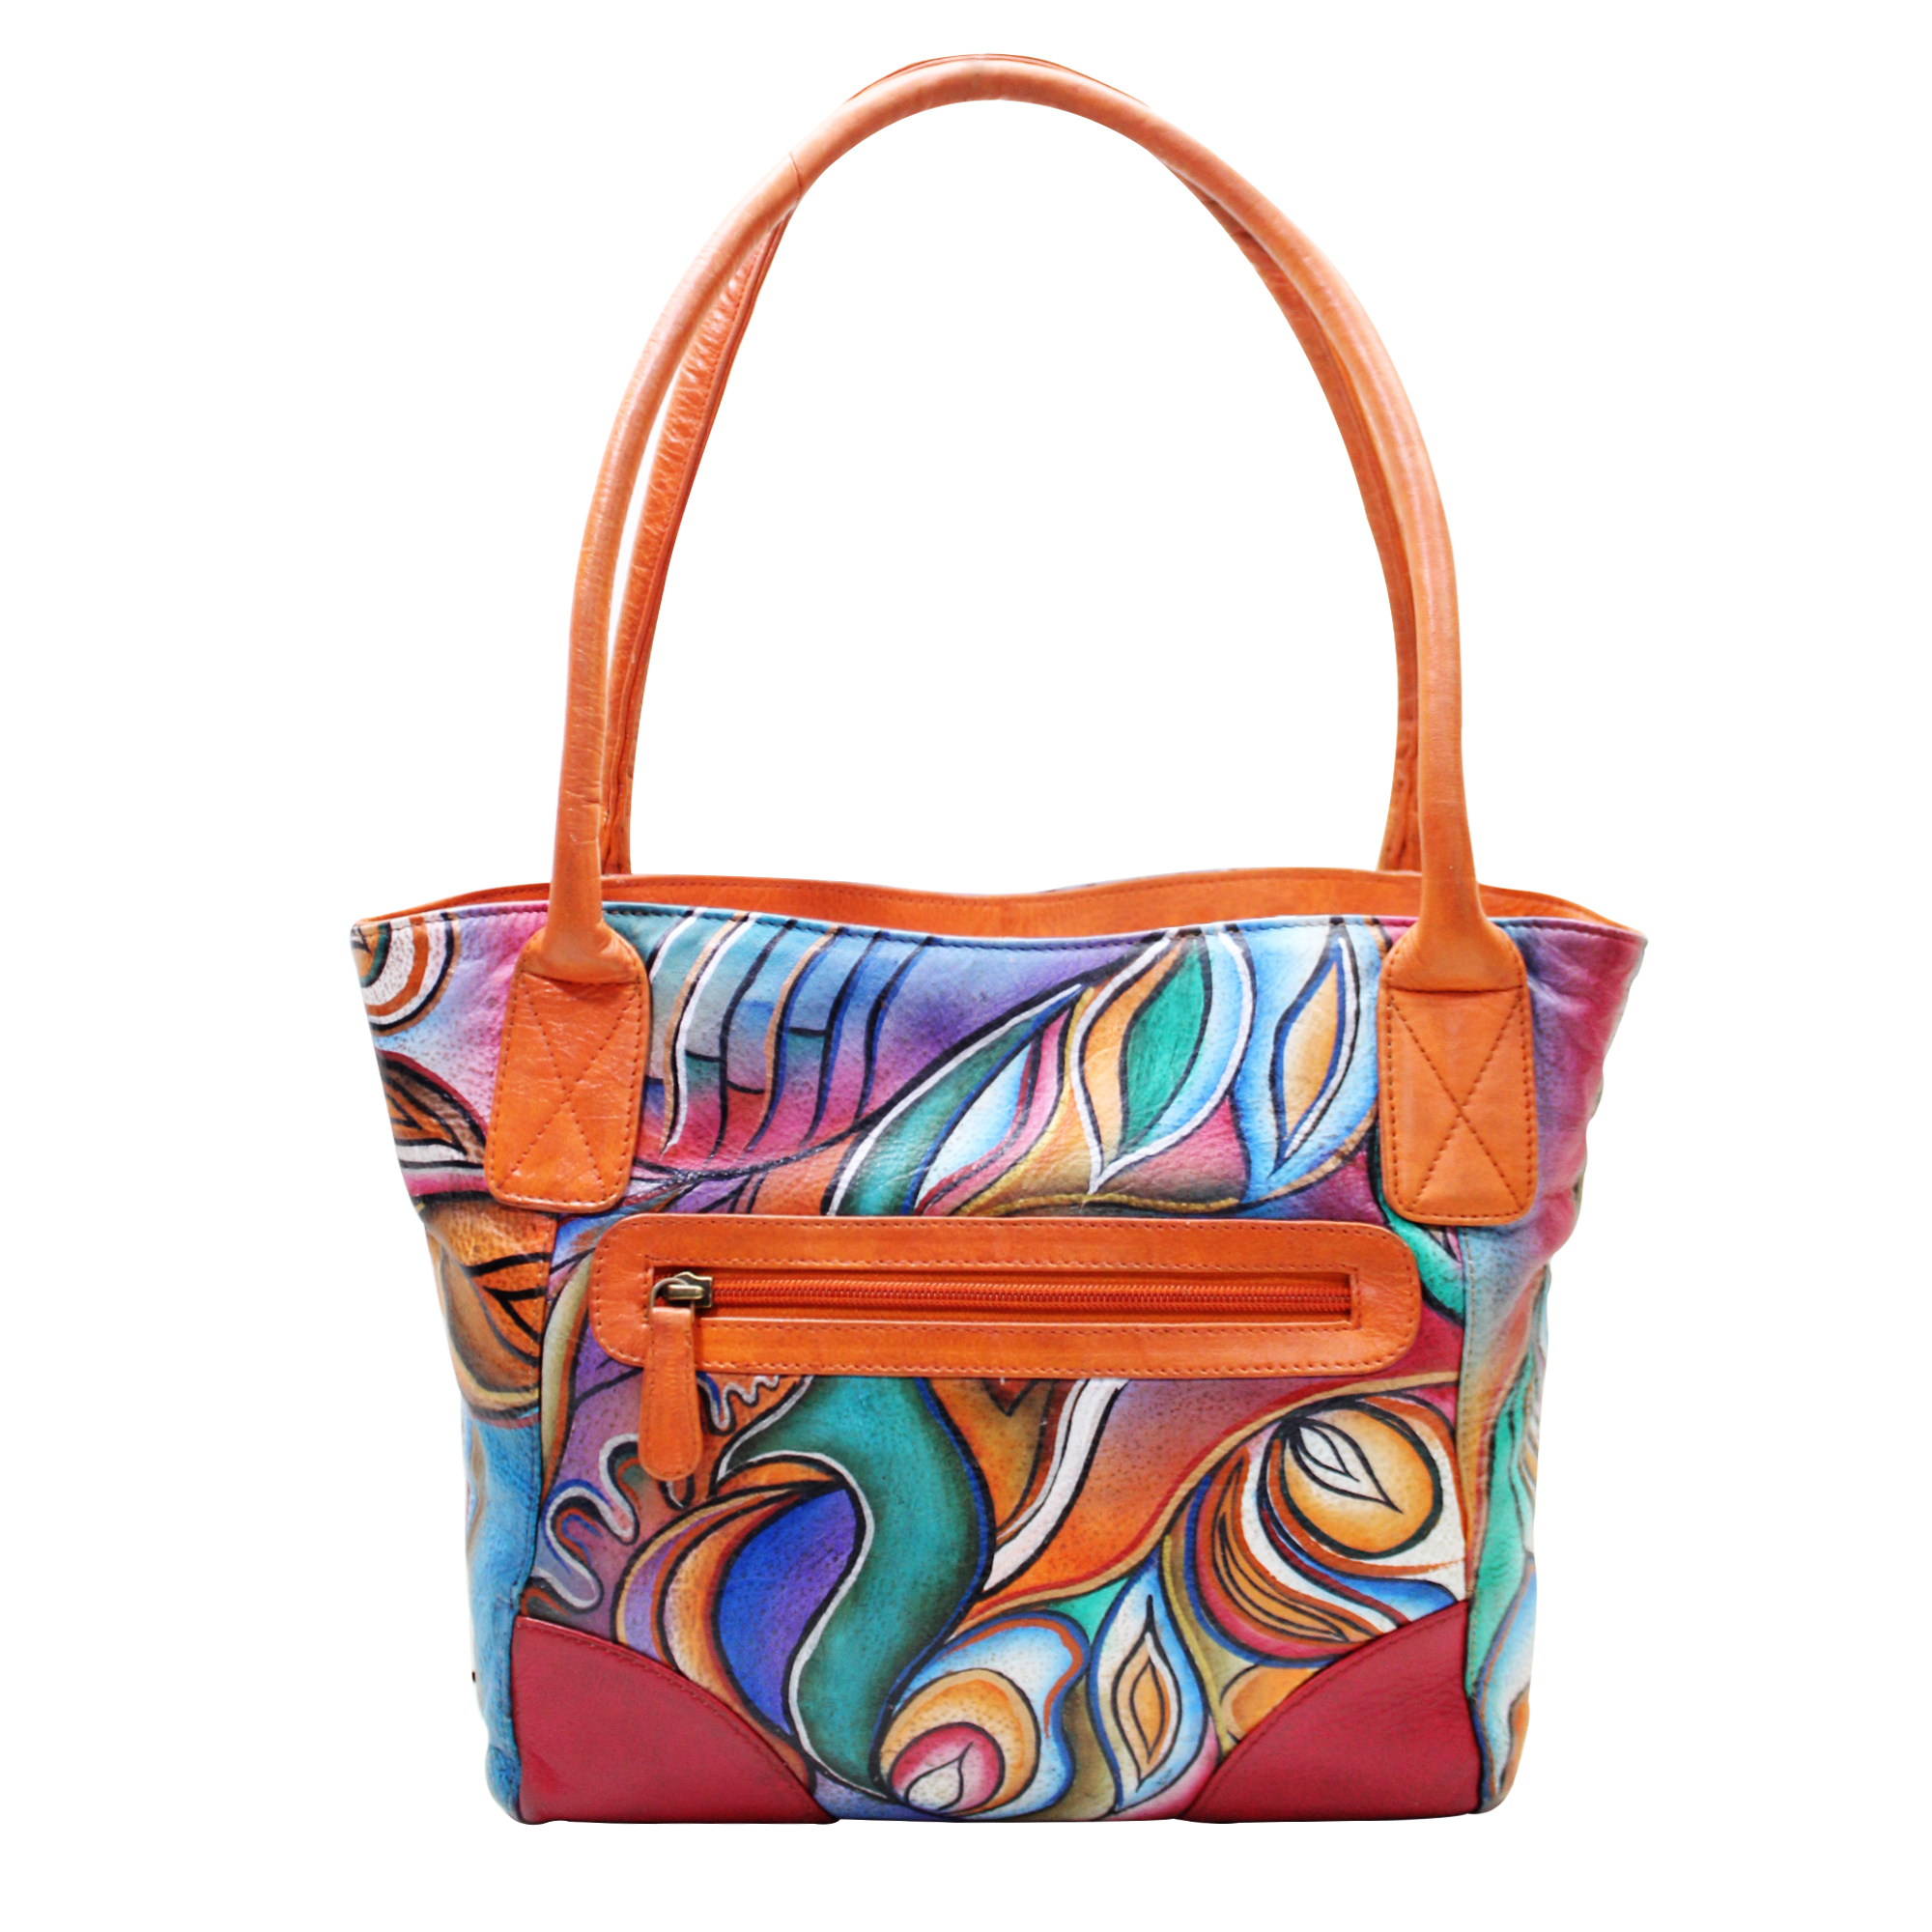 Women Leather Hand Painted Tote Shoulder Bag